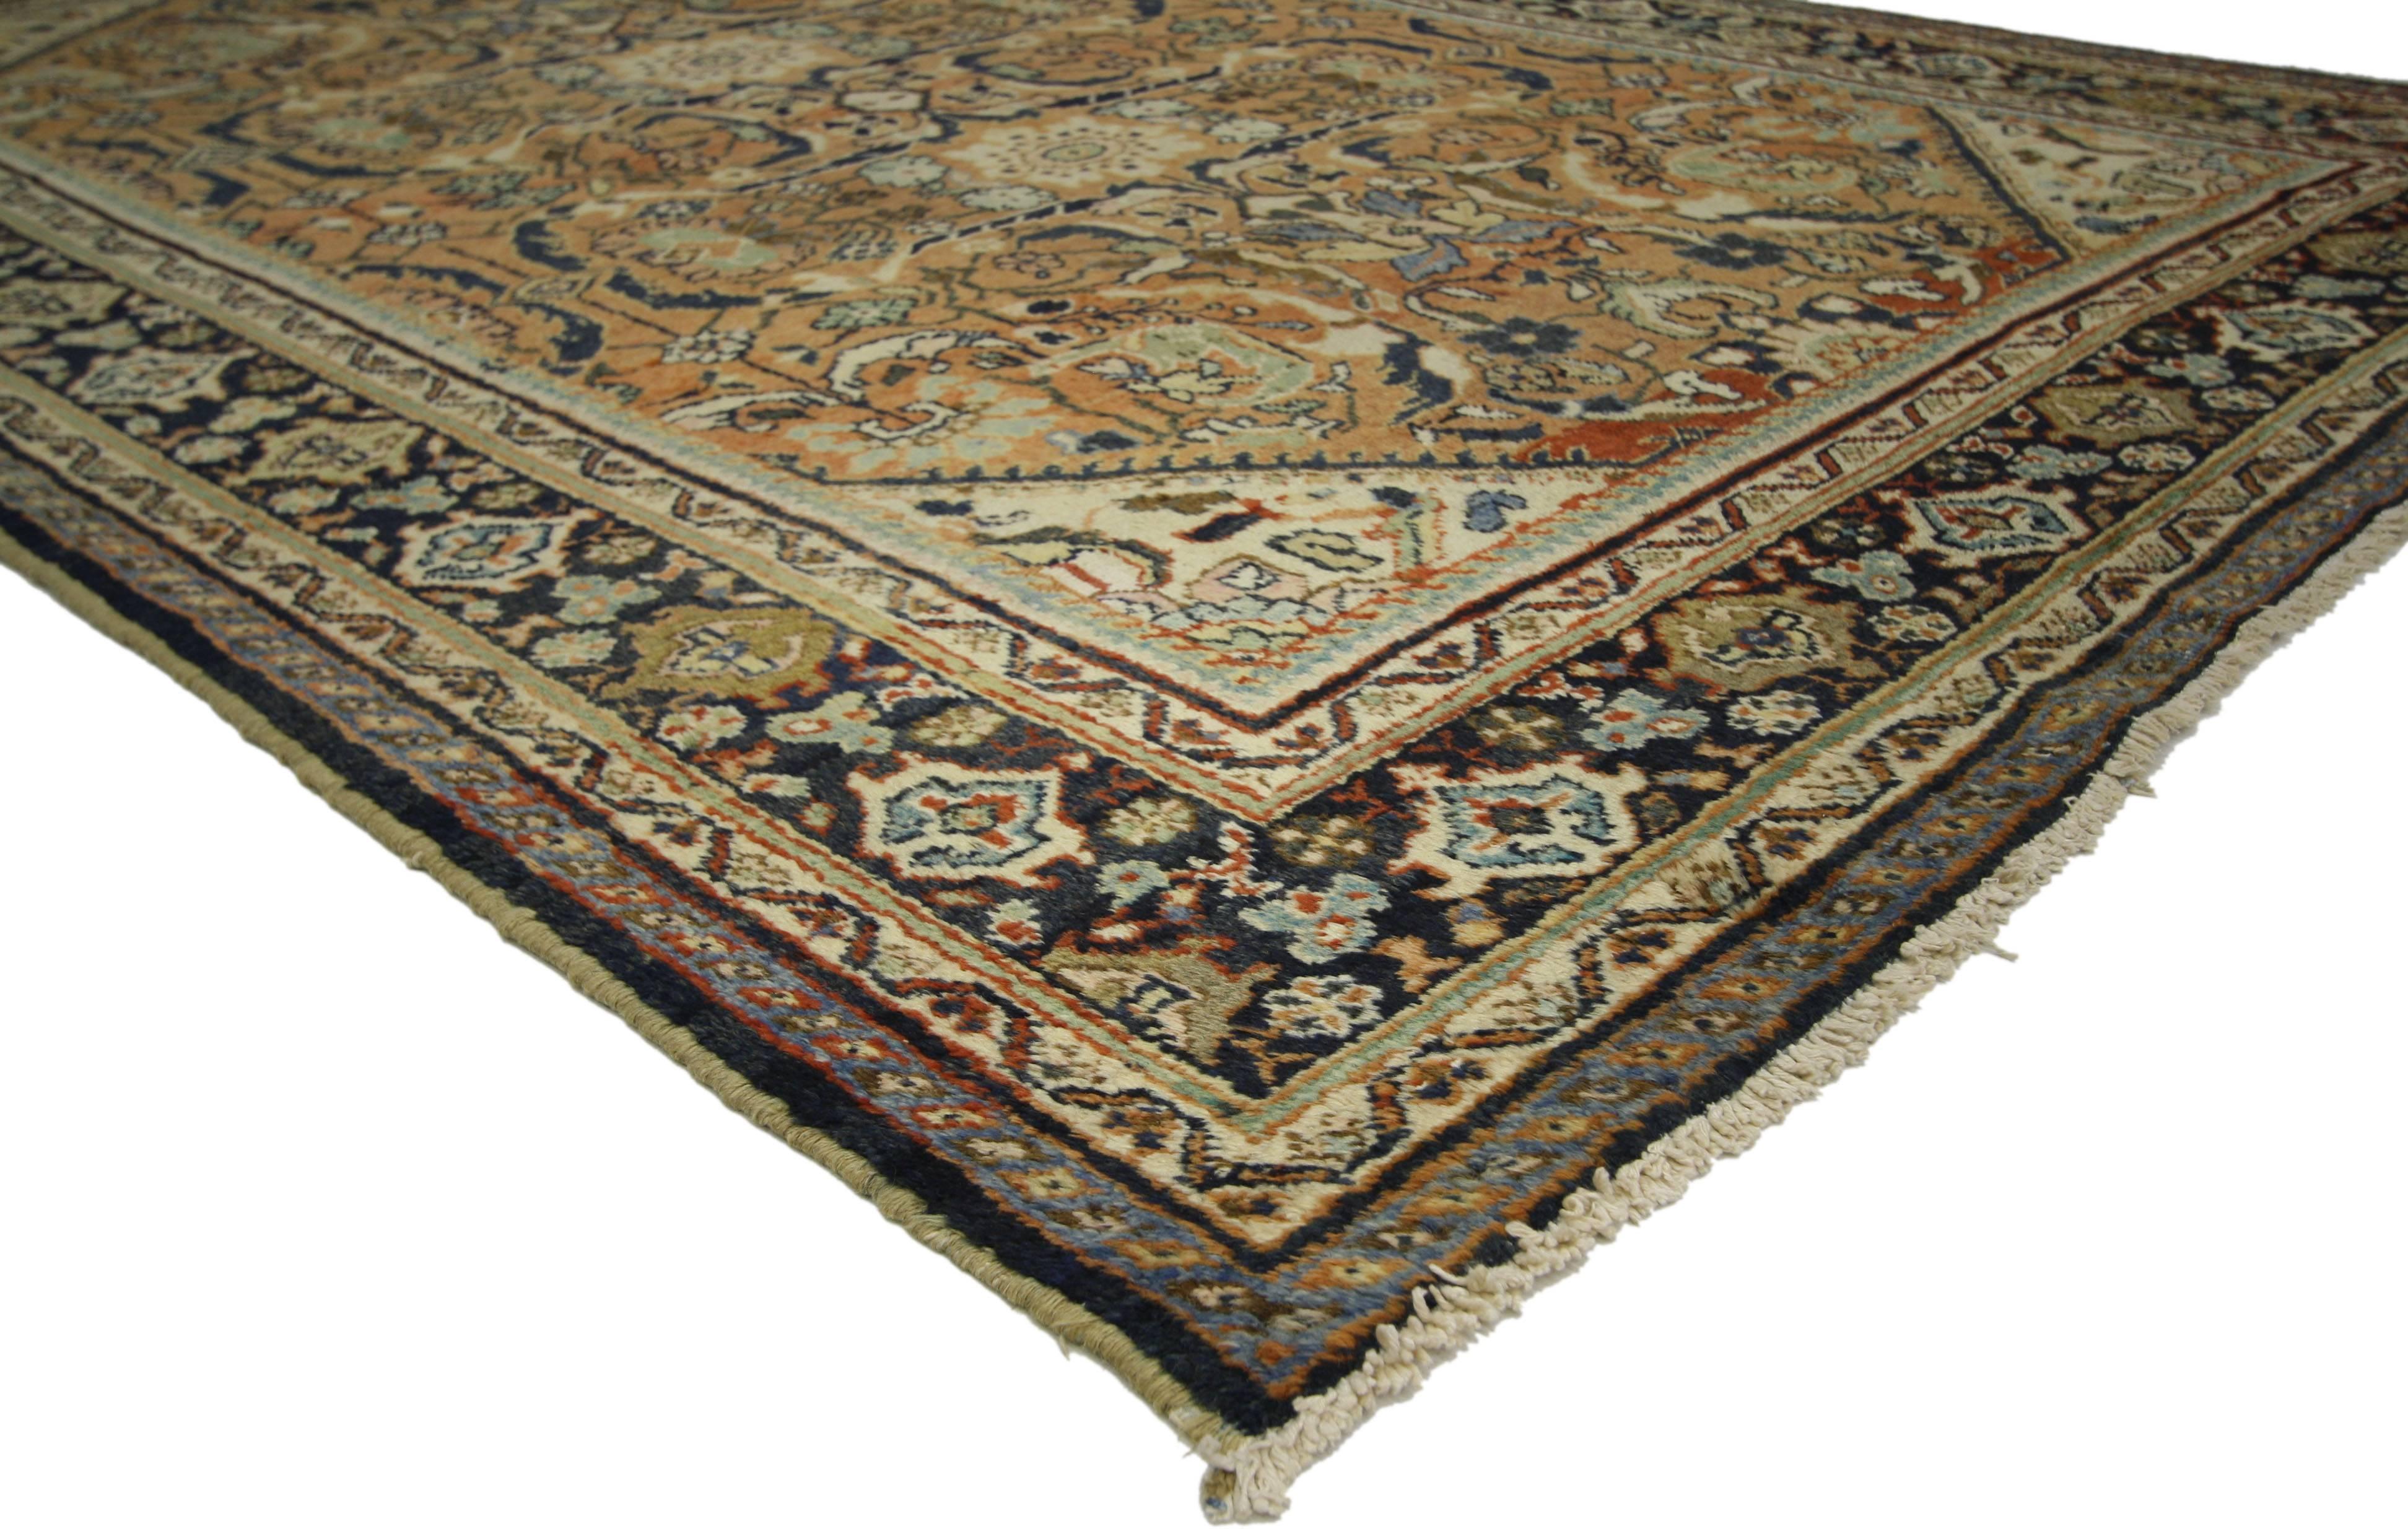 72732 antique Persian Mahal rug with warm, Bungalow Craftsman style. Warm and inviting, this hand knotted wool antique Persian Mahal beautifully embodies a Bungalow Craftsman style. The abrashed rust colored field is covered in an all-over botanical